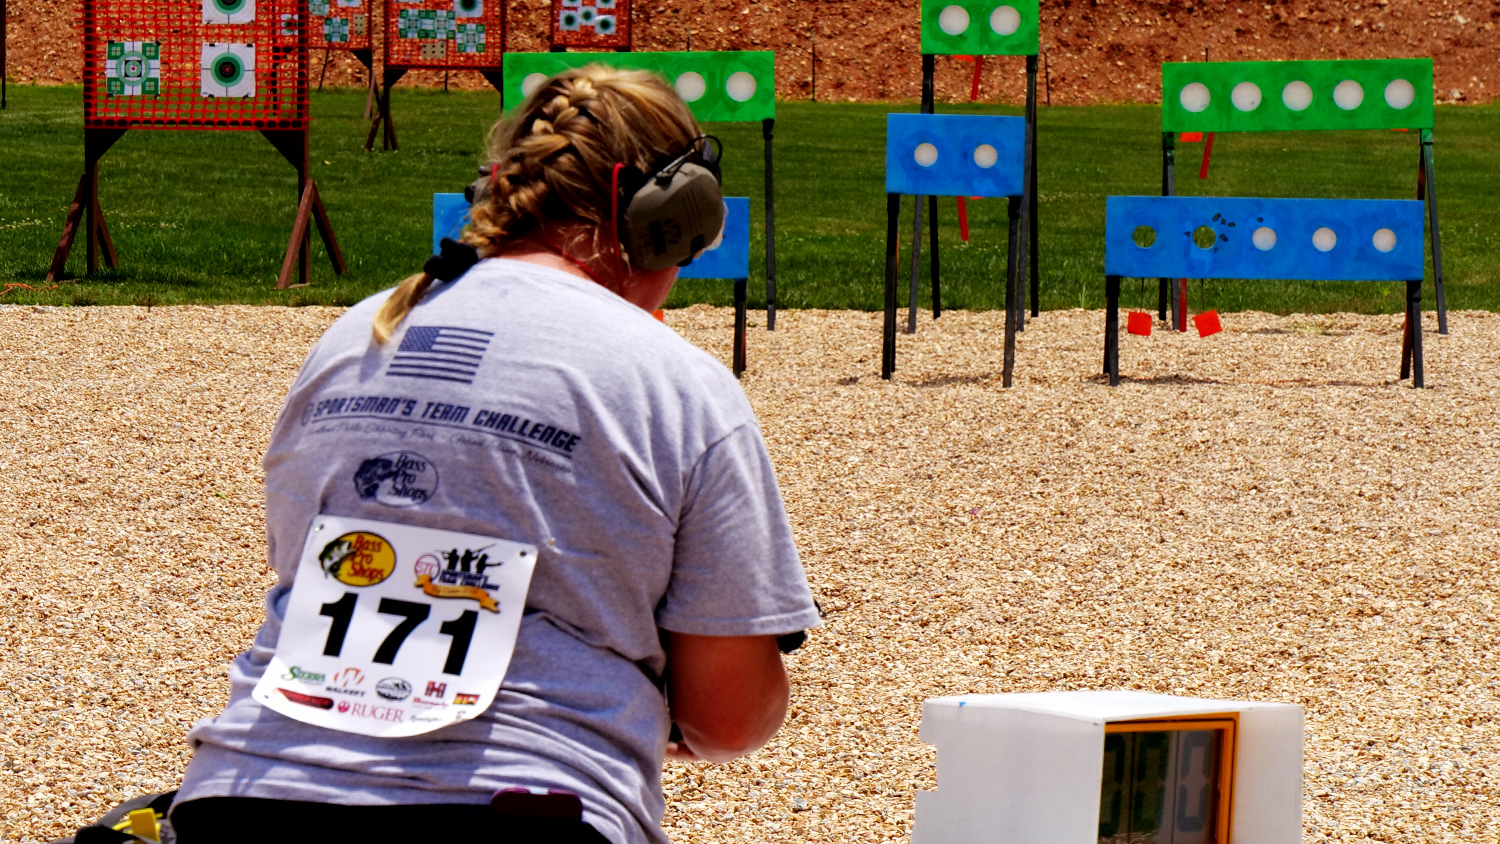 Hornady sponsored the Pistol Course of Fire at the 2018 Sportsman's Team Challenge National Championships